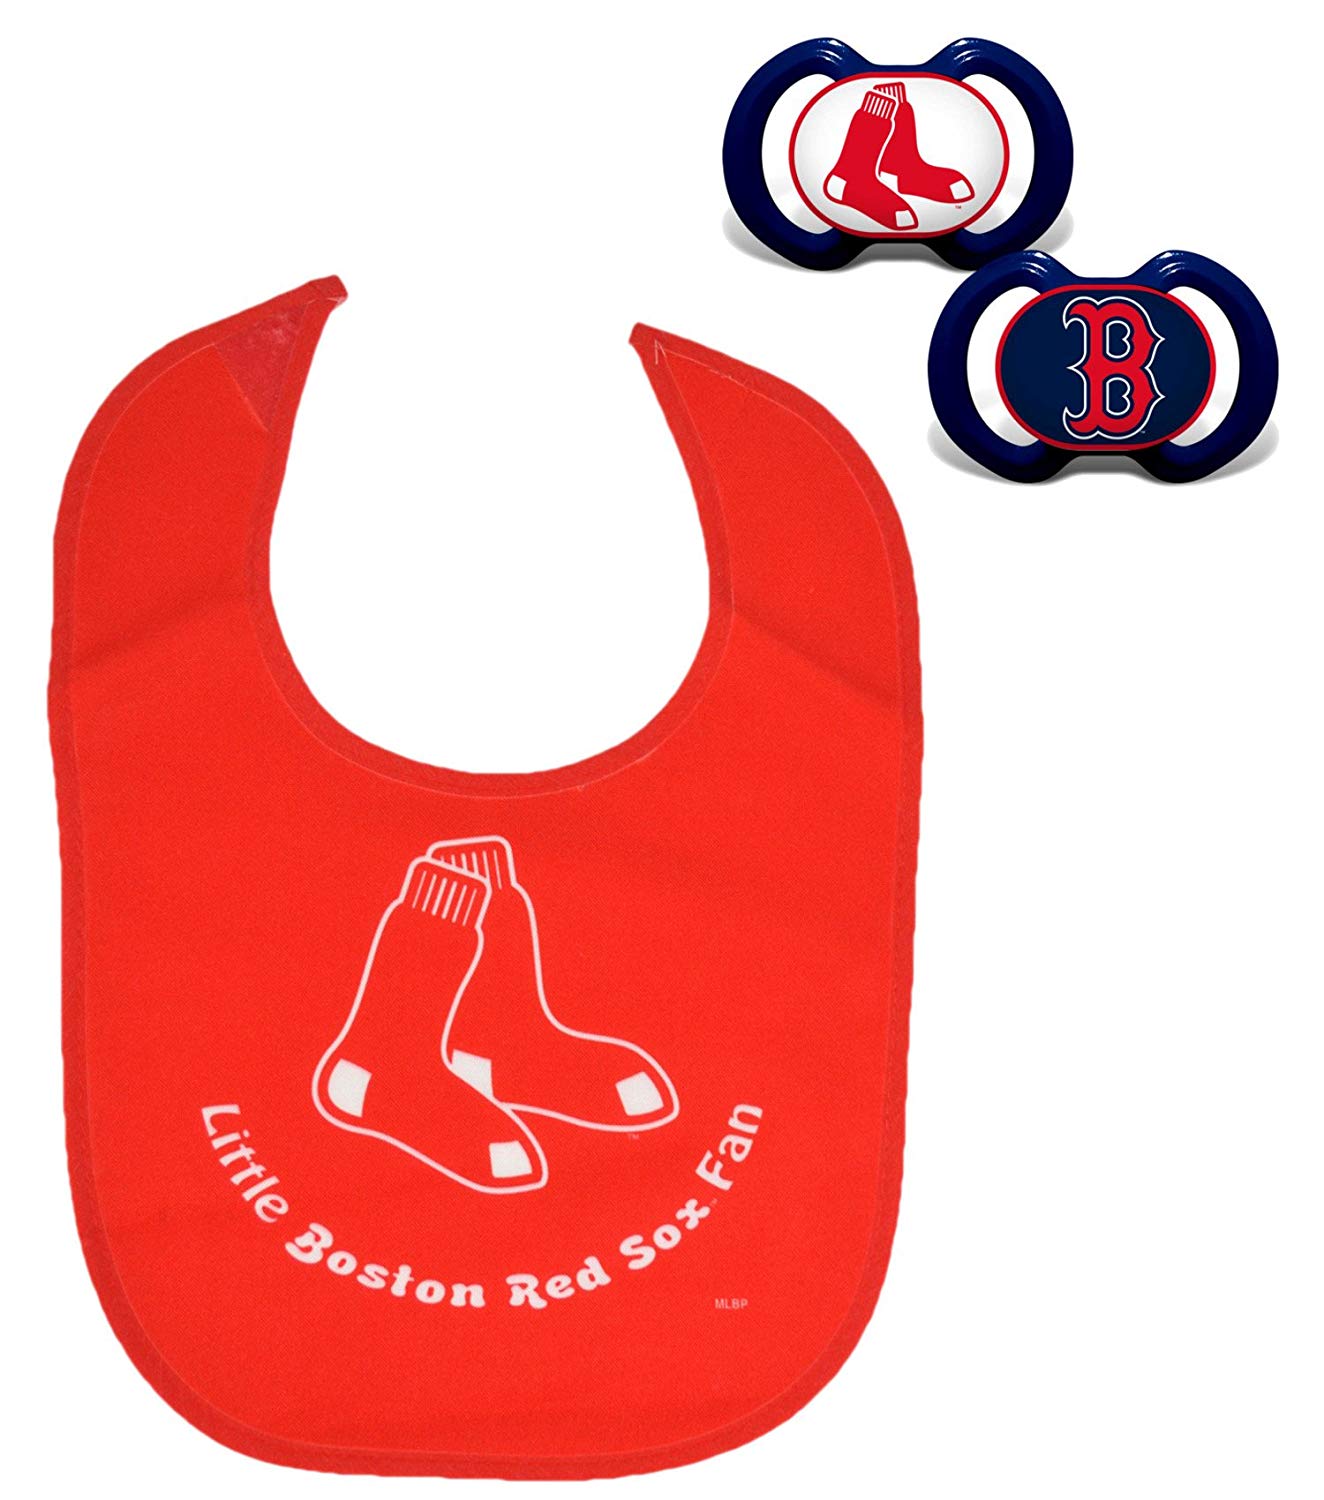 Official MLB Fan Shop Authentic Baby Pacifier and Bib Set. Start the Little Ones Out Early in Joining the Number One Major League Baseball Fans